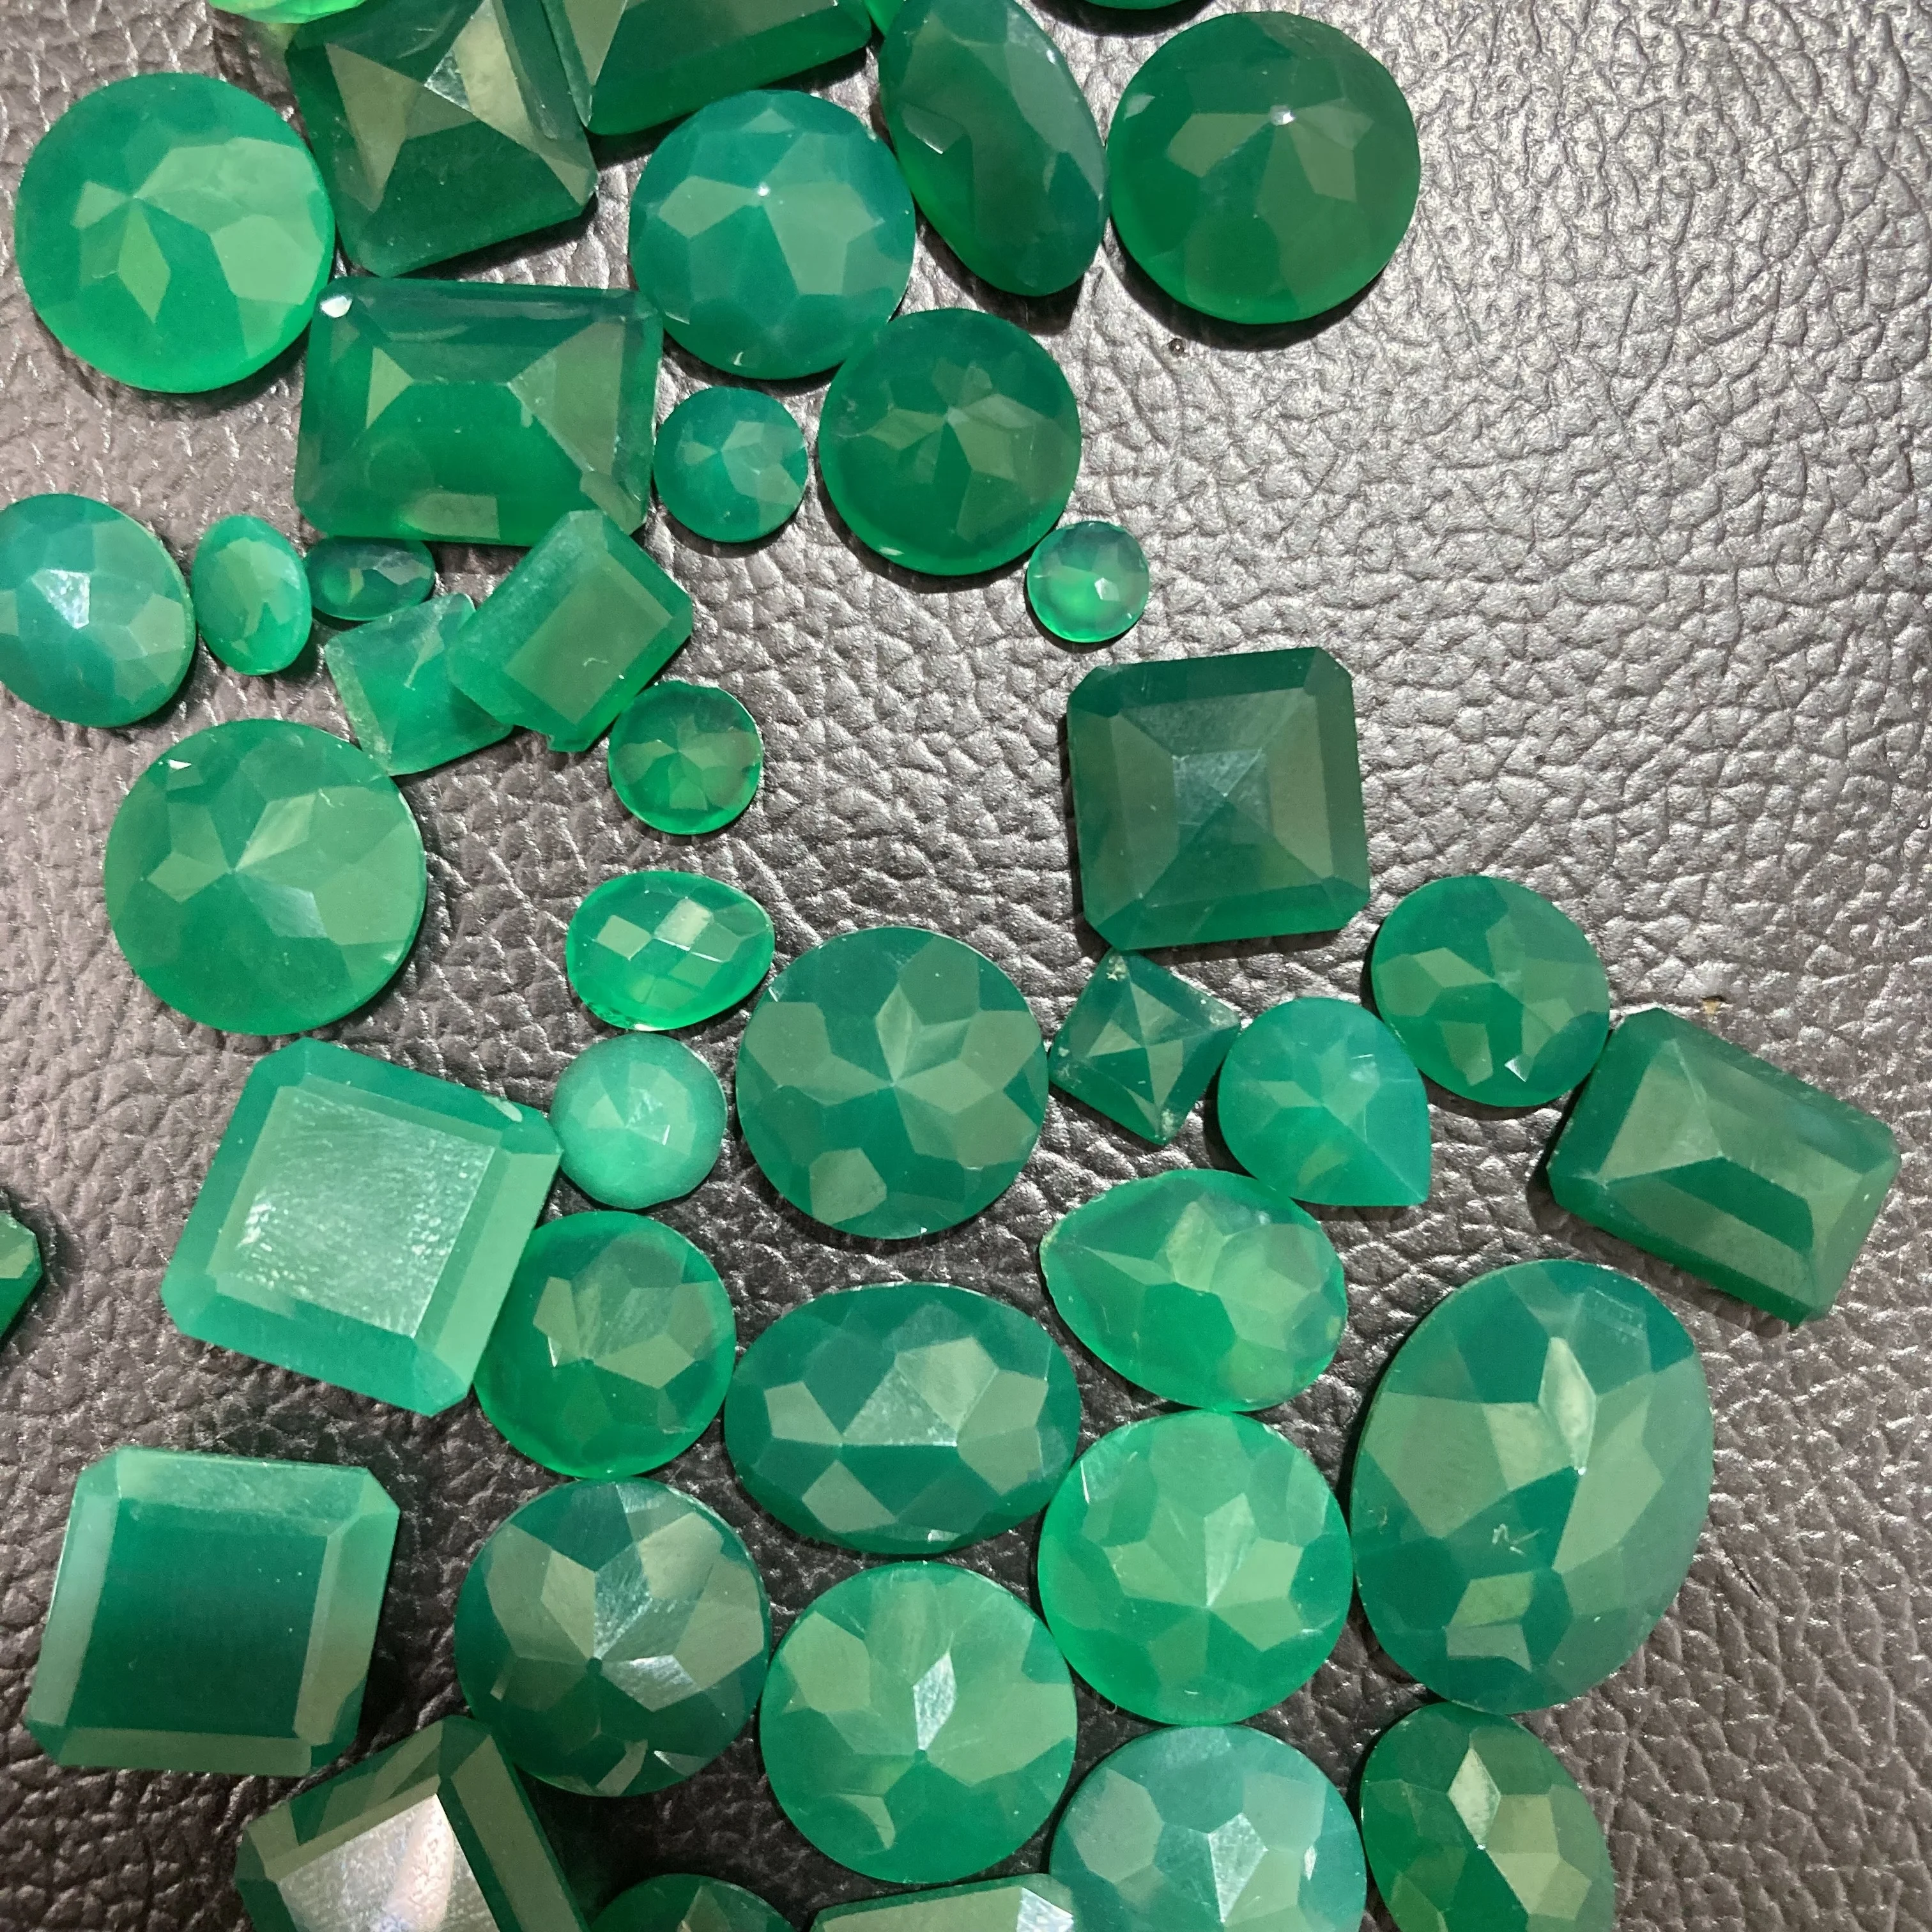 Details about   Wholesale Lot Natural Green Onyx Round Cabochon Loose Gemestones Length 14X14MM 